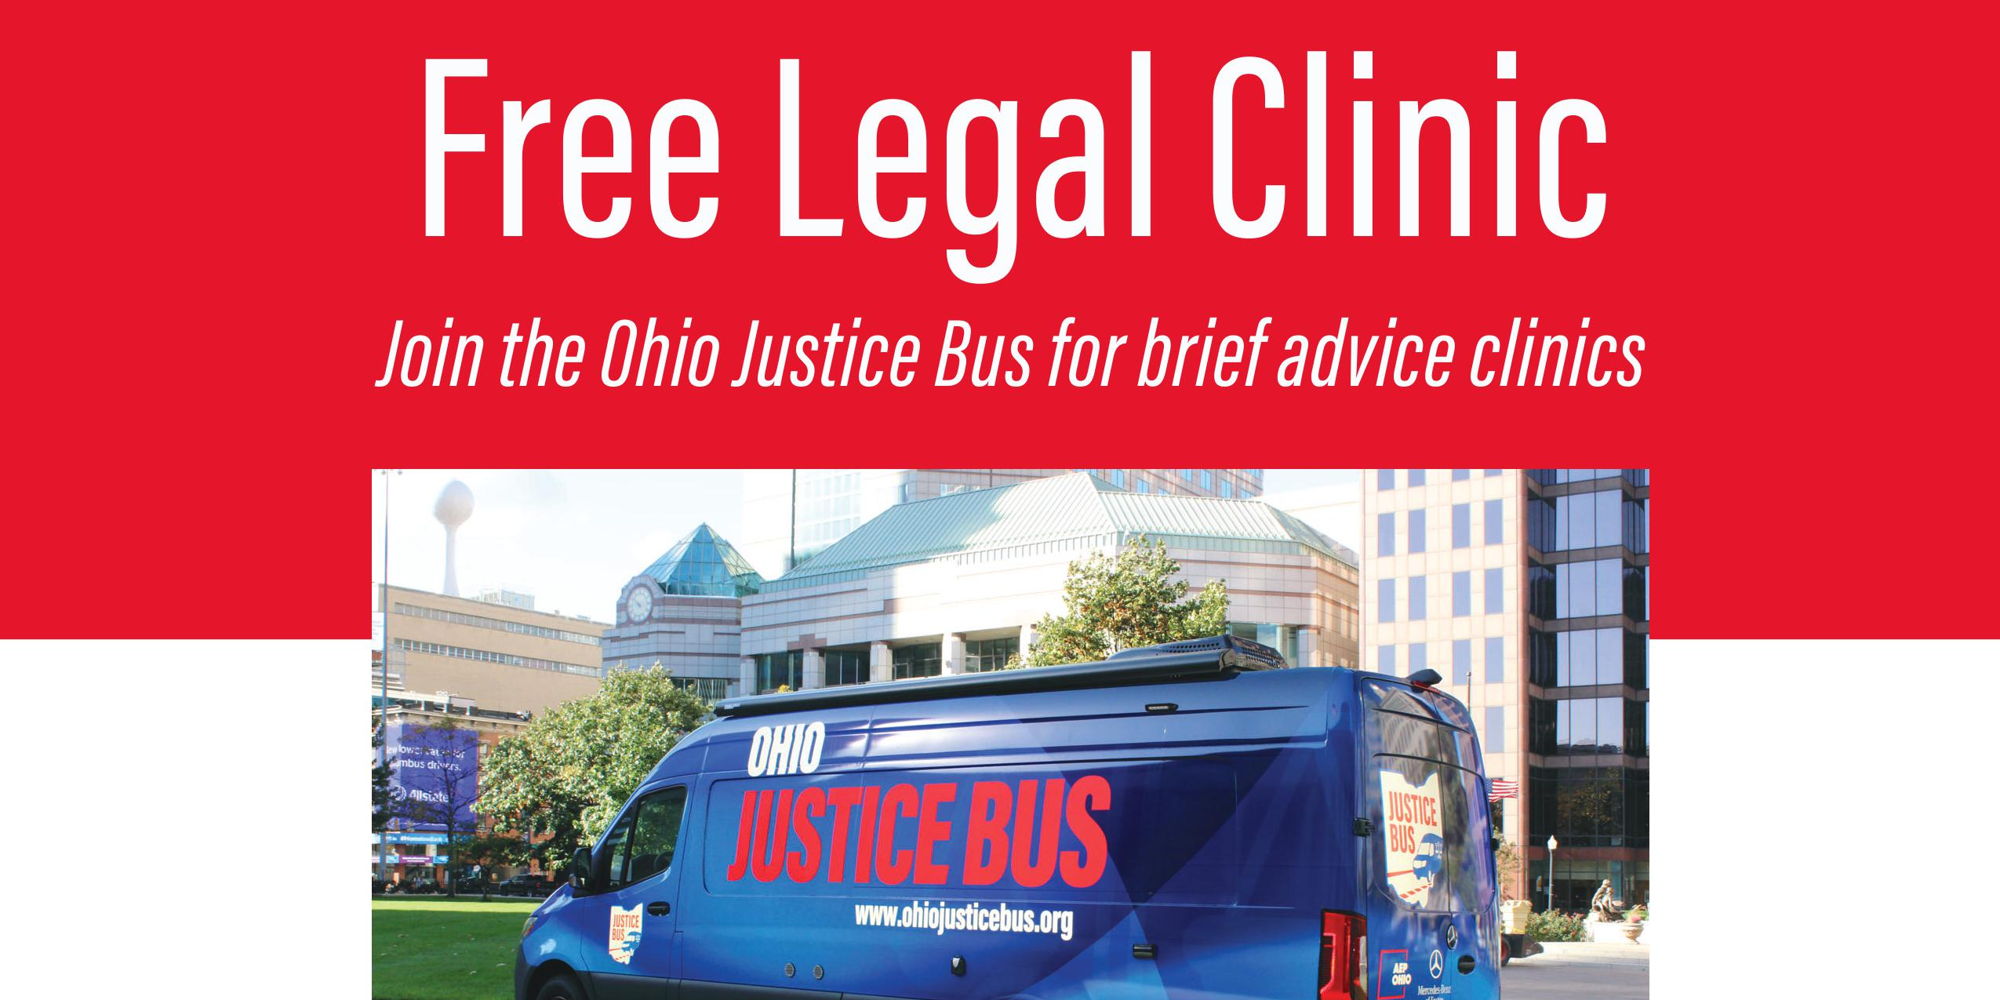 Free Legal Clinic promotional image